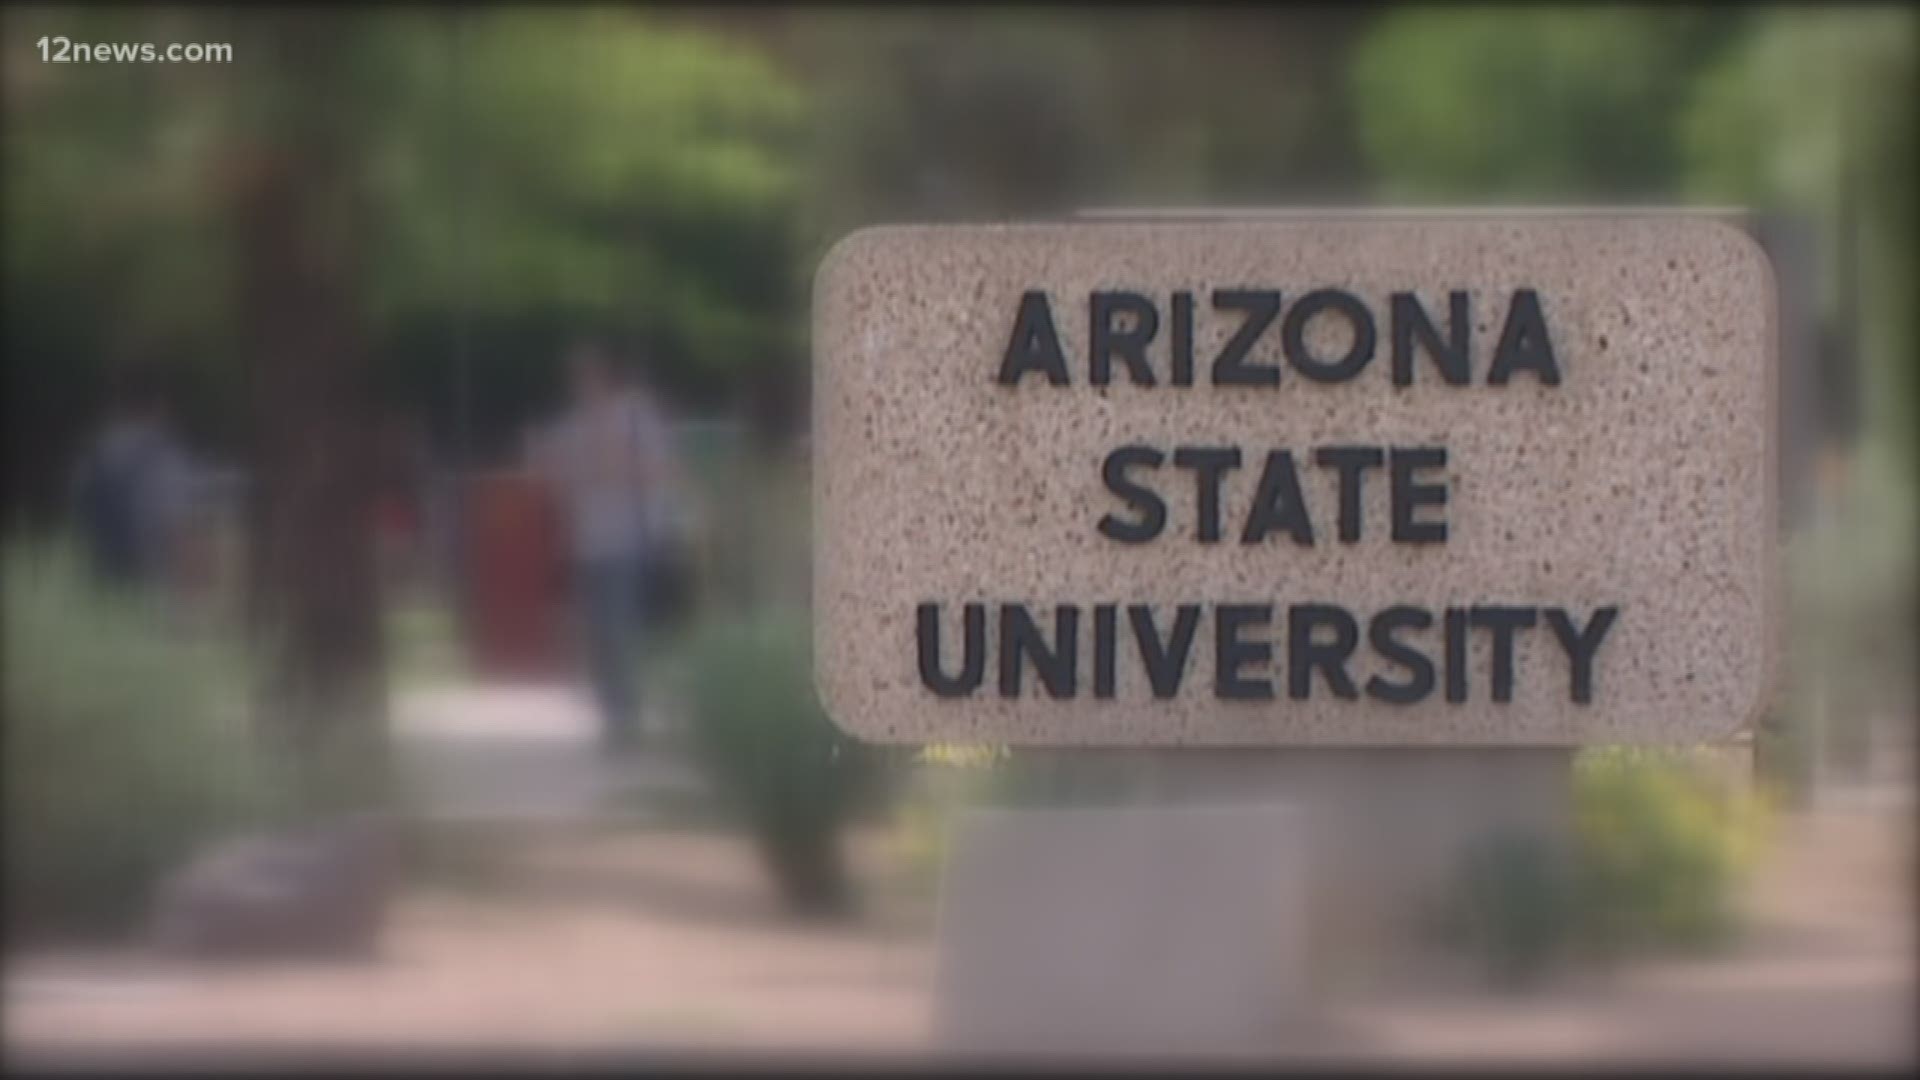 Arizona State says they have not been given information on what transpired and says each student was in possession of all required documentation at the airport.